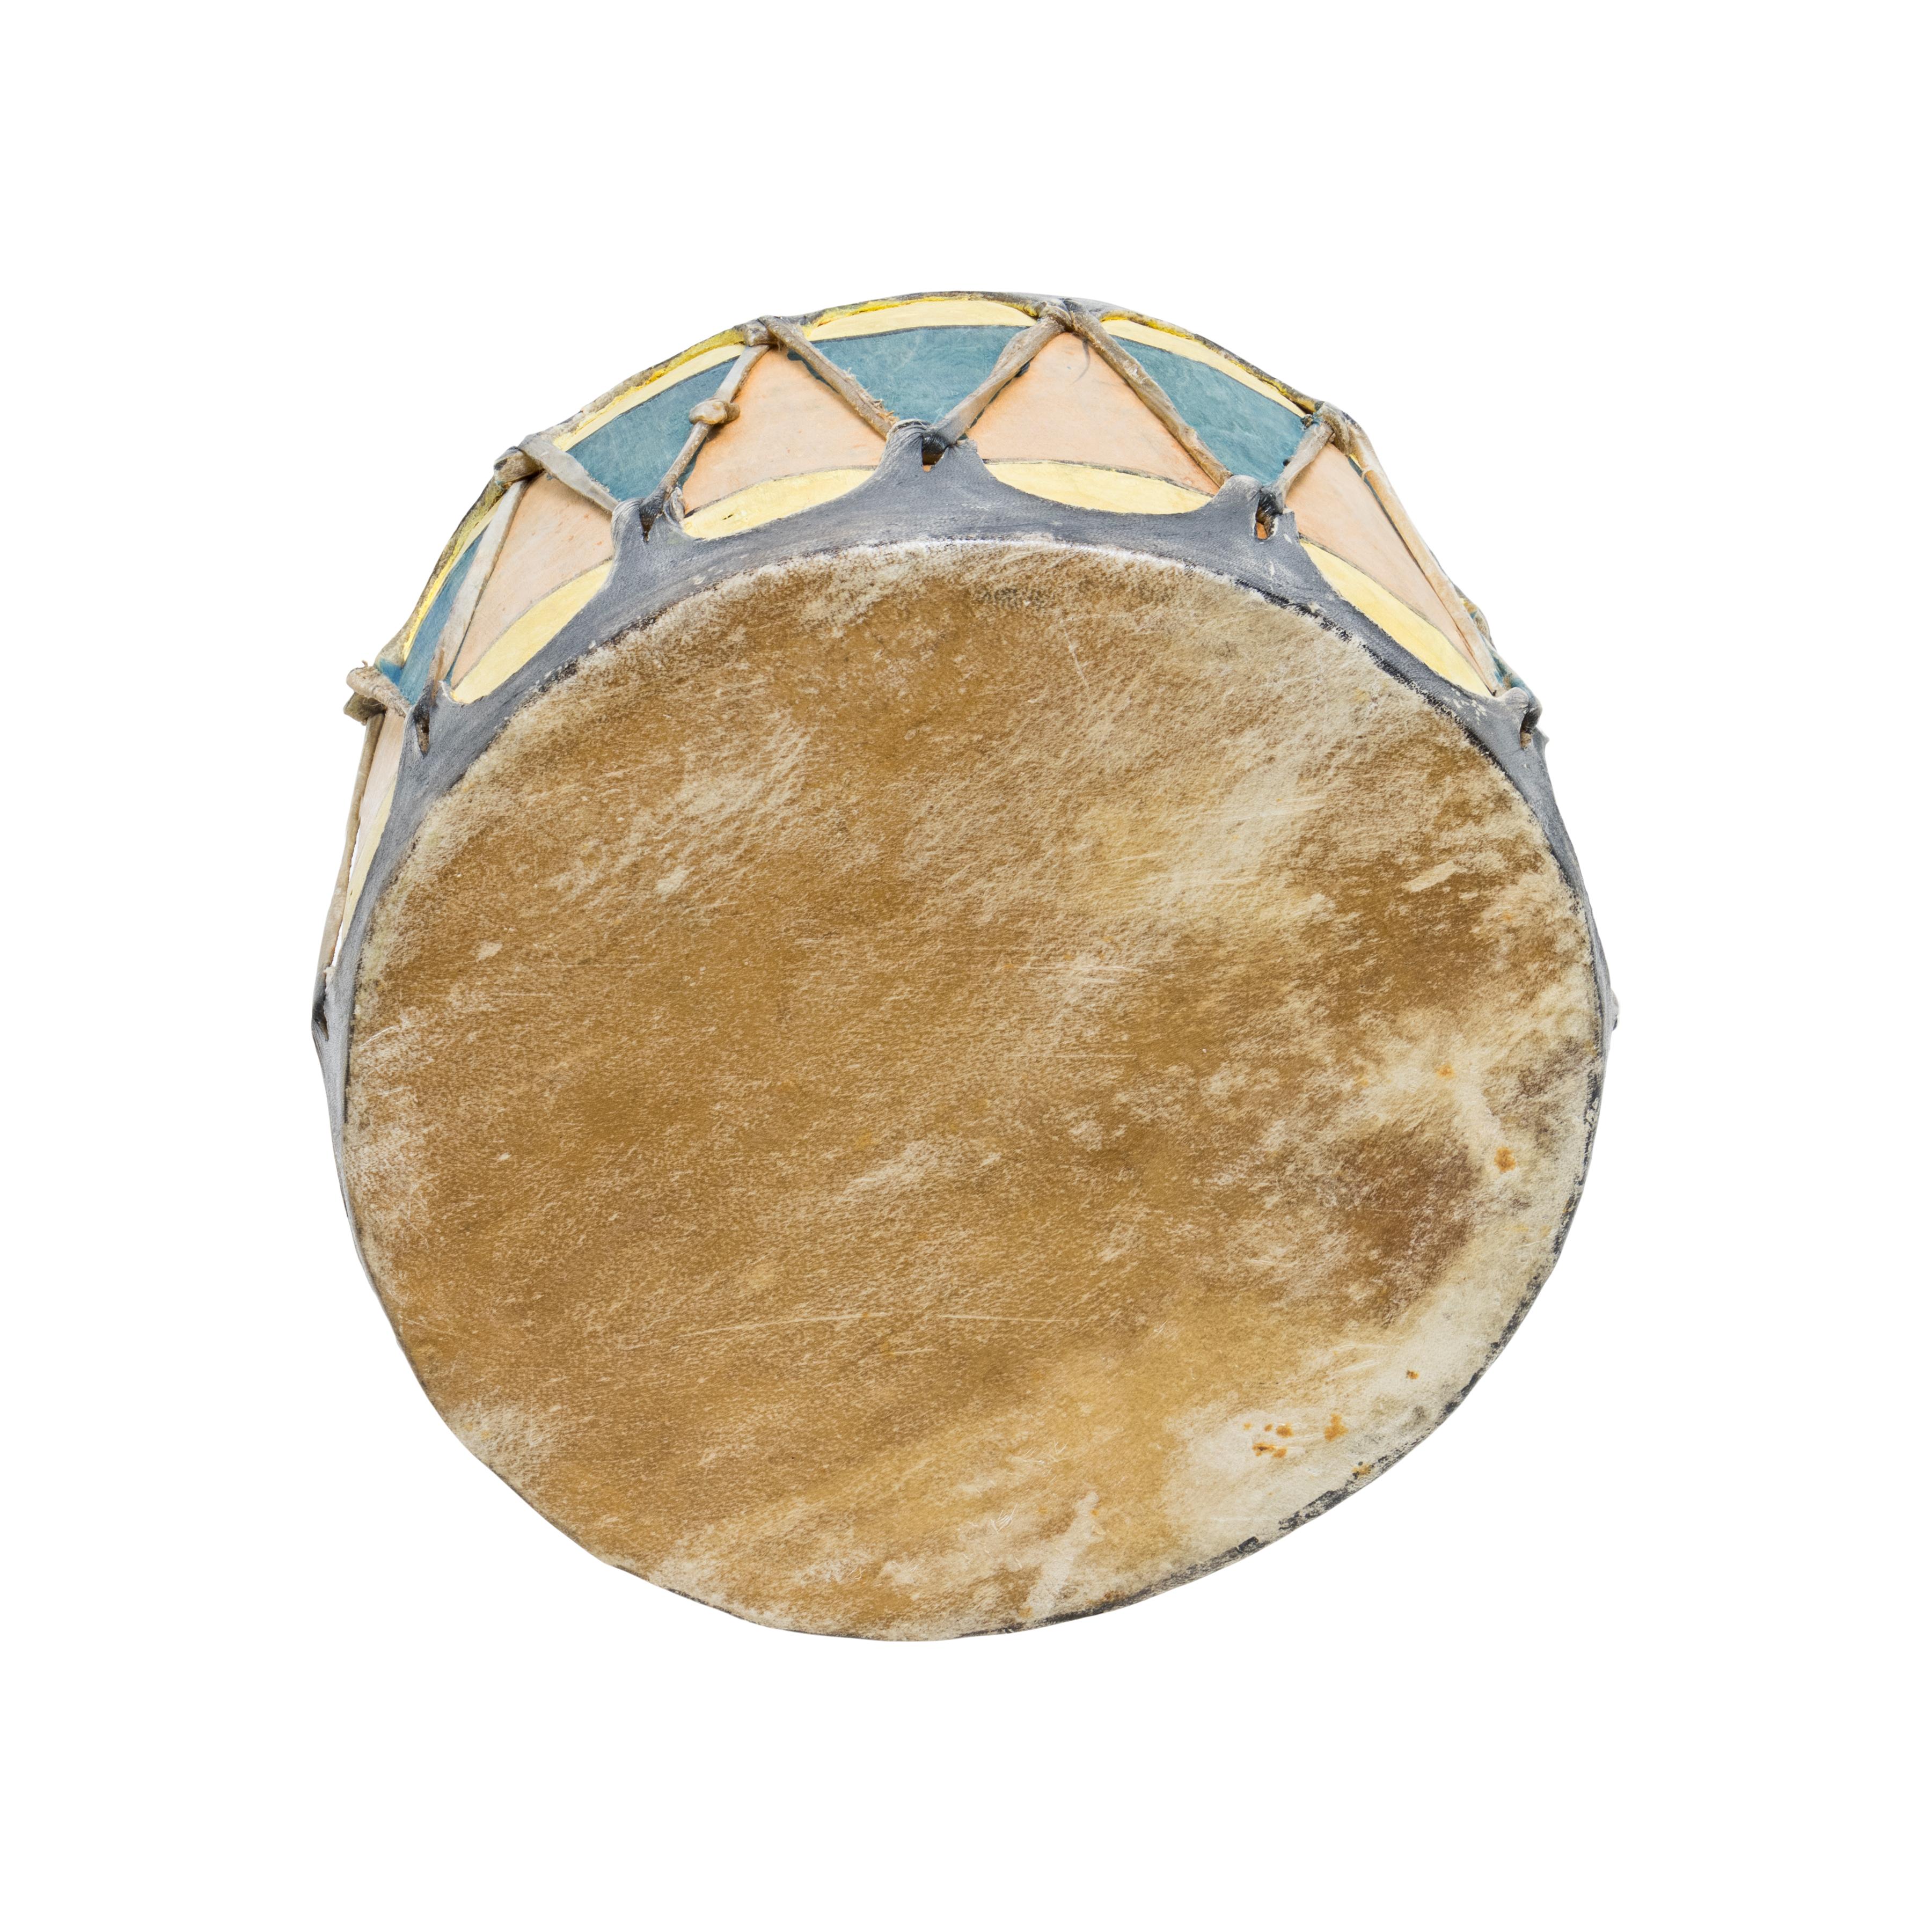 Native American Cochiti drum with sides painted in tan, yellow and blue with black striping. Made of wood and hide. 

Period: Early 20th century

Origin: Southwest, Cochiti

Size: 7 1/2